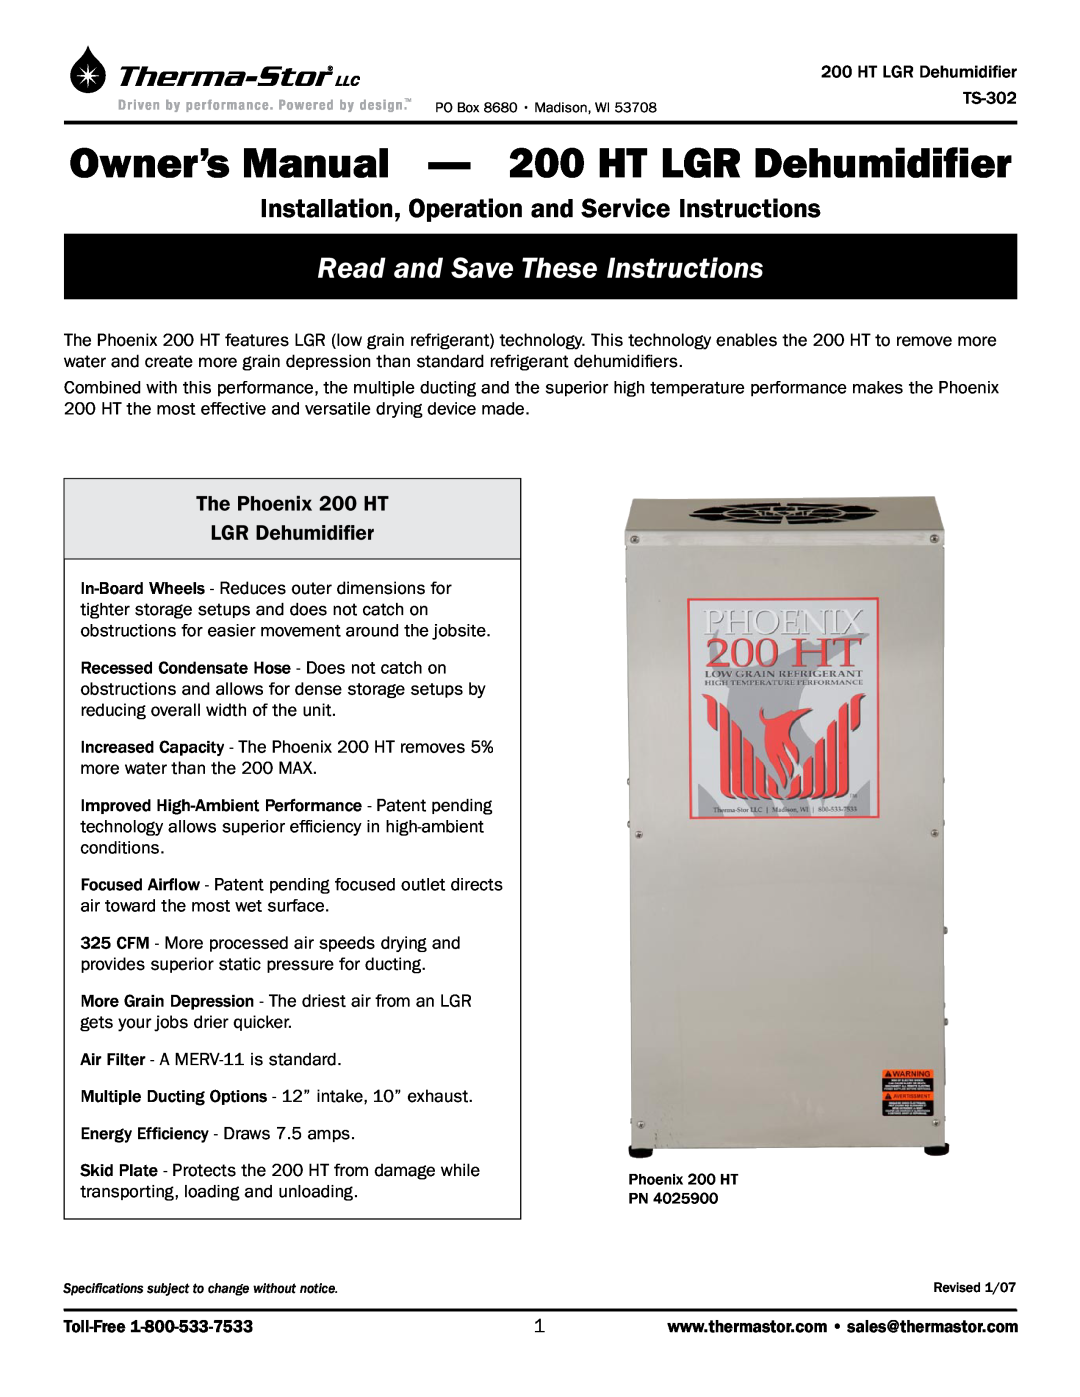 Therma-Stor Products Group owner manual The Phoenix 200 HT LGR Dehumidifier, Read and Save These Instructions 